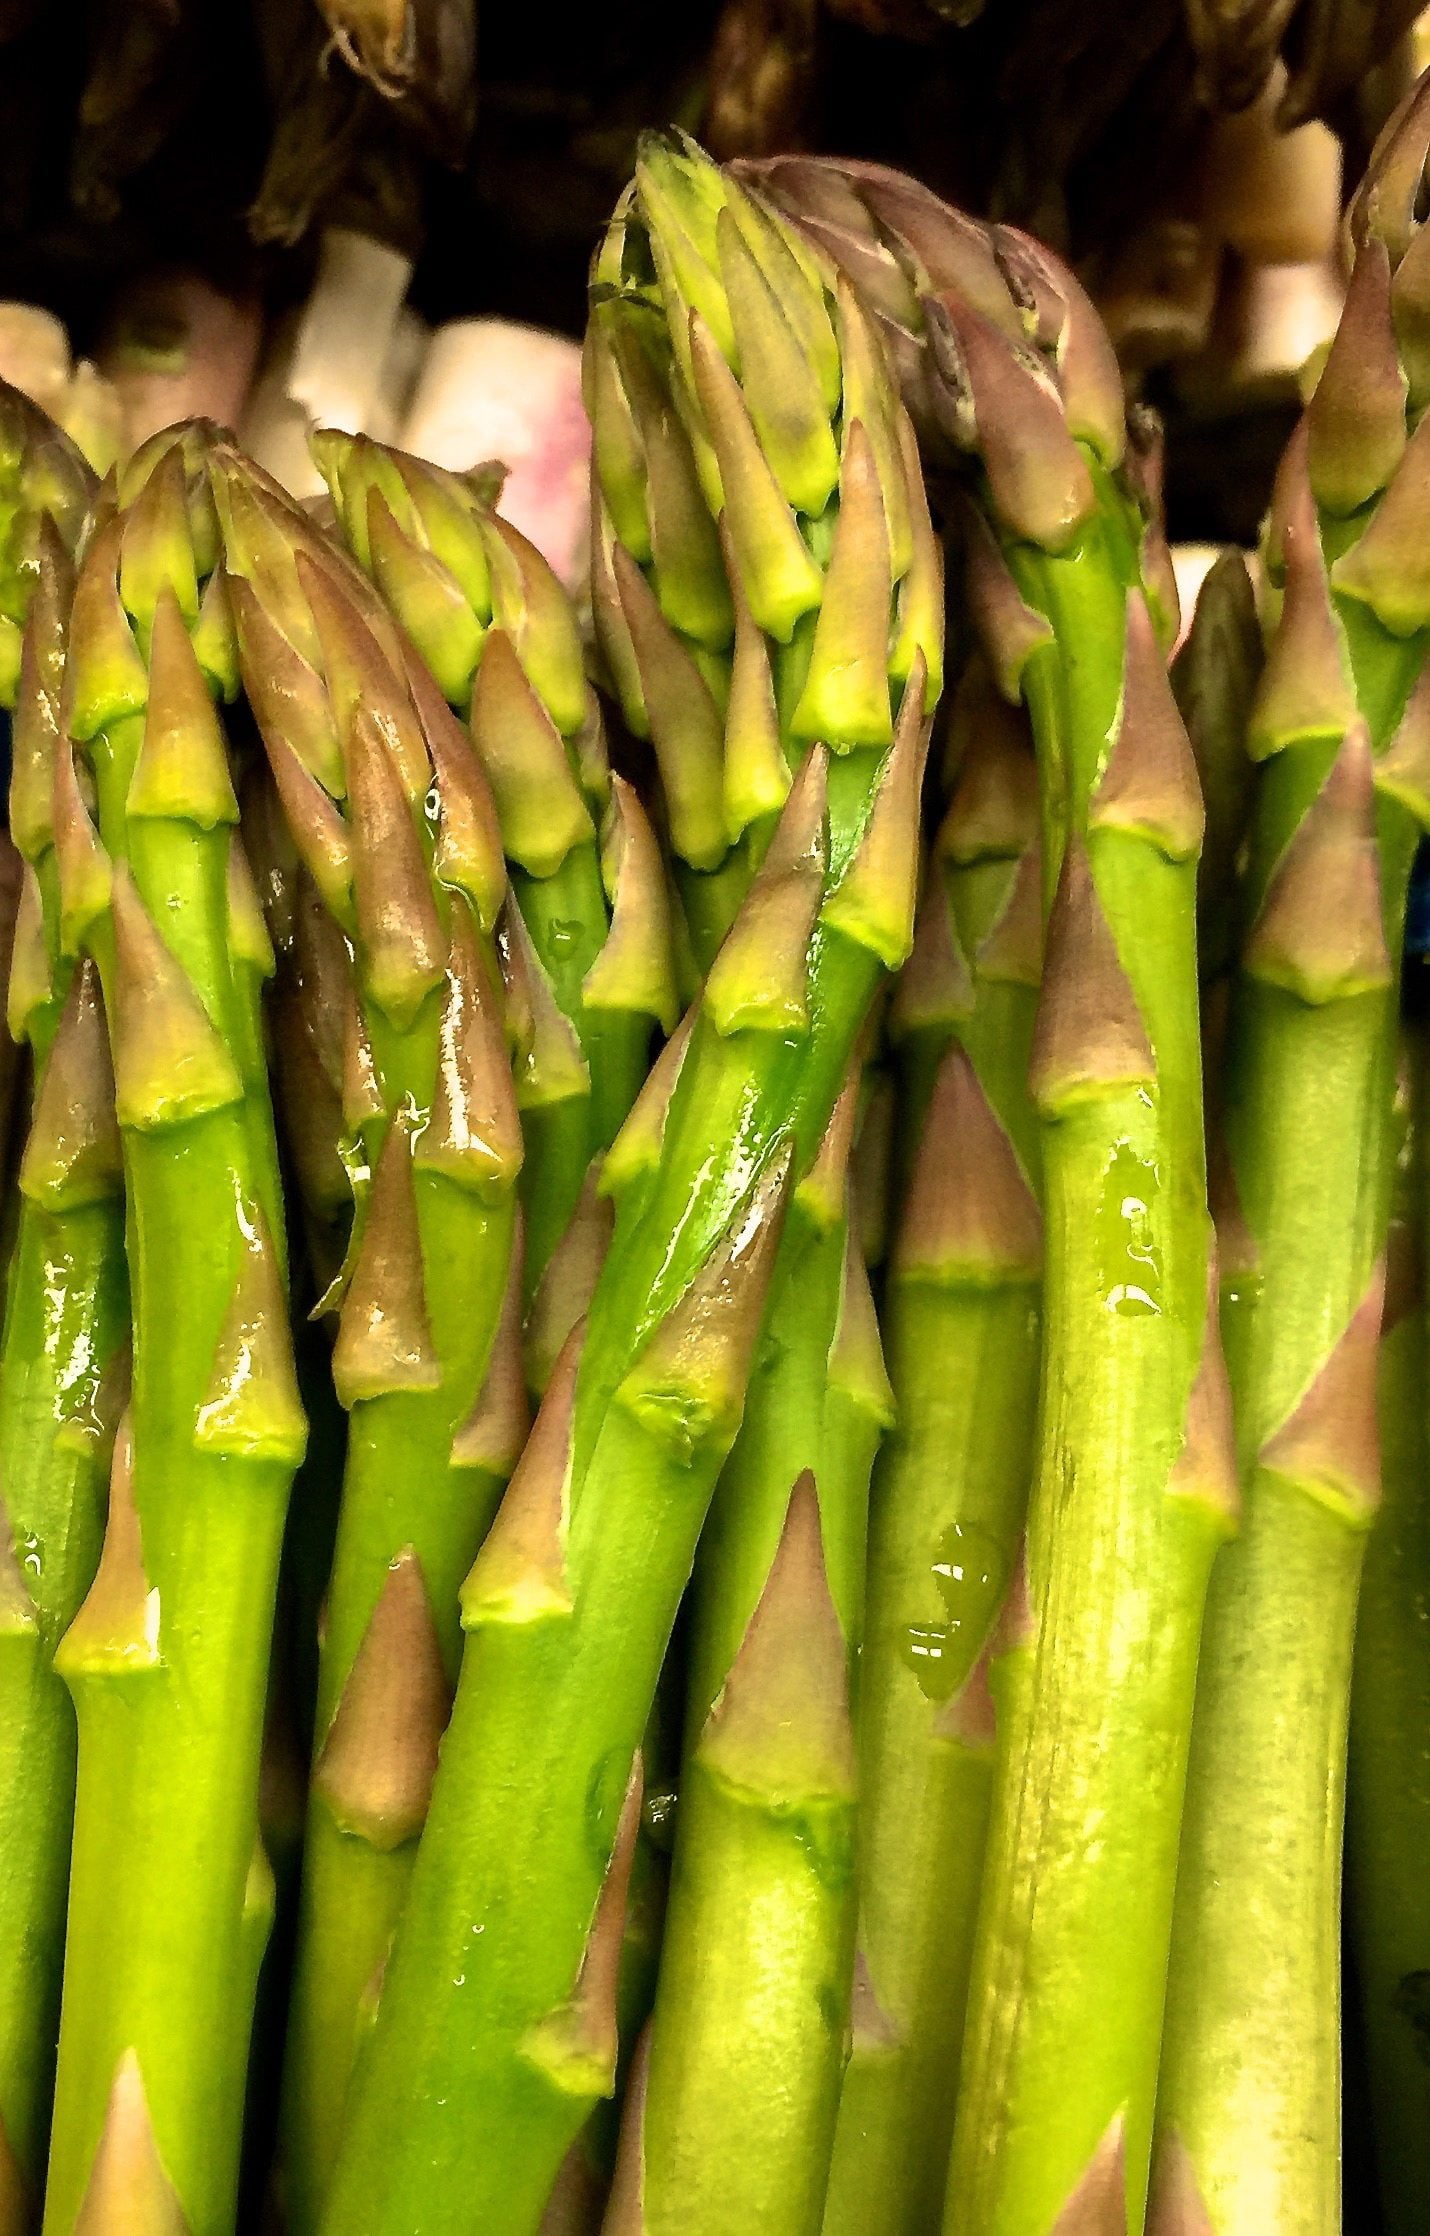 Asparagus spears, seen Jan. 12 at a Freeland grocery taste best immediately after harvest. Asparagus will tolerate refrigeration for several weeks, but at the expense of some of its sweetness, crispness and flavor.